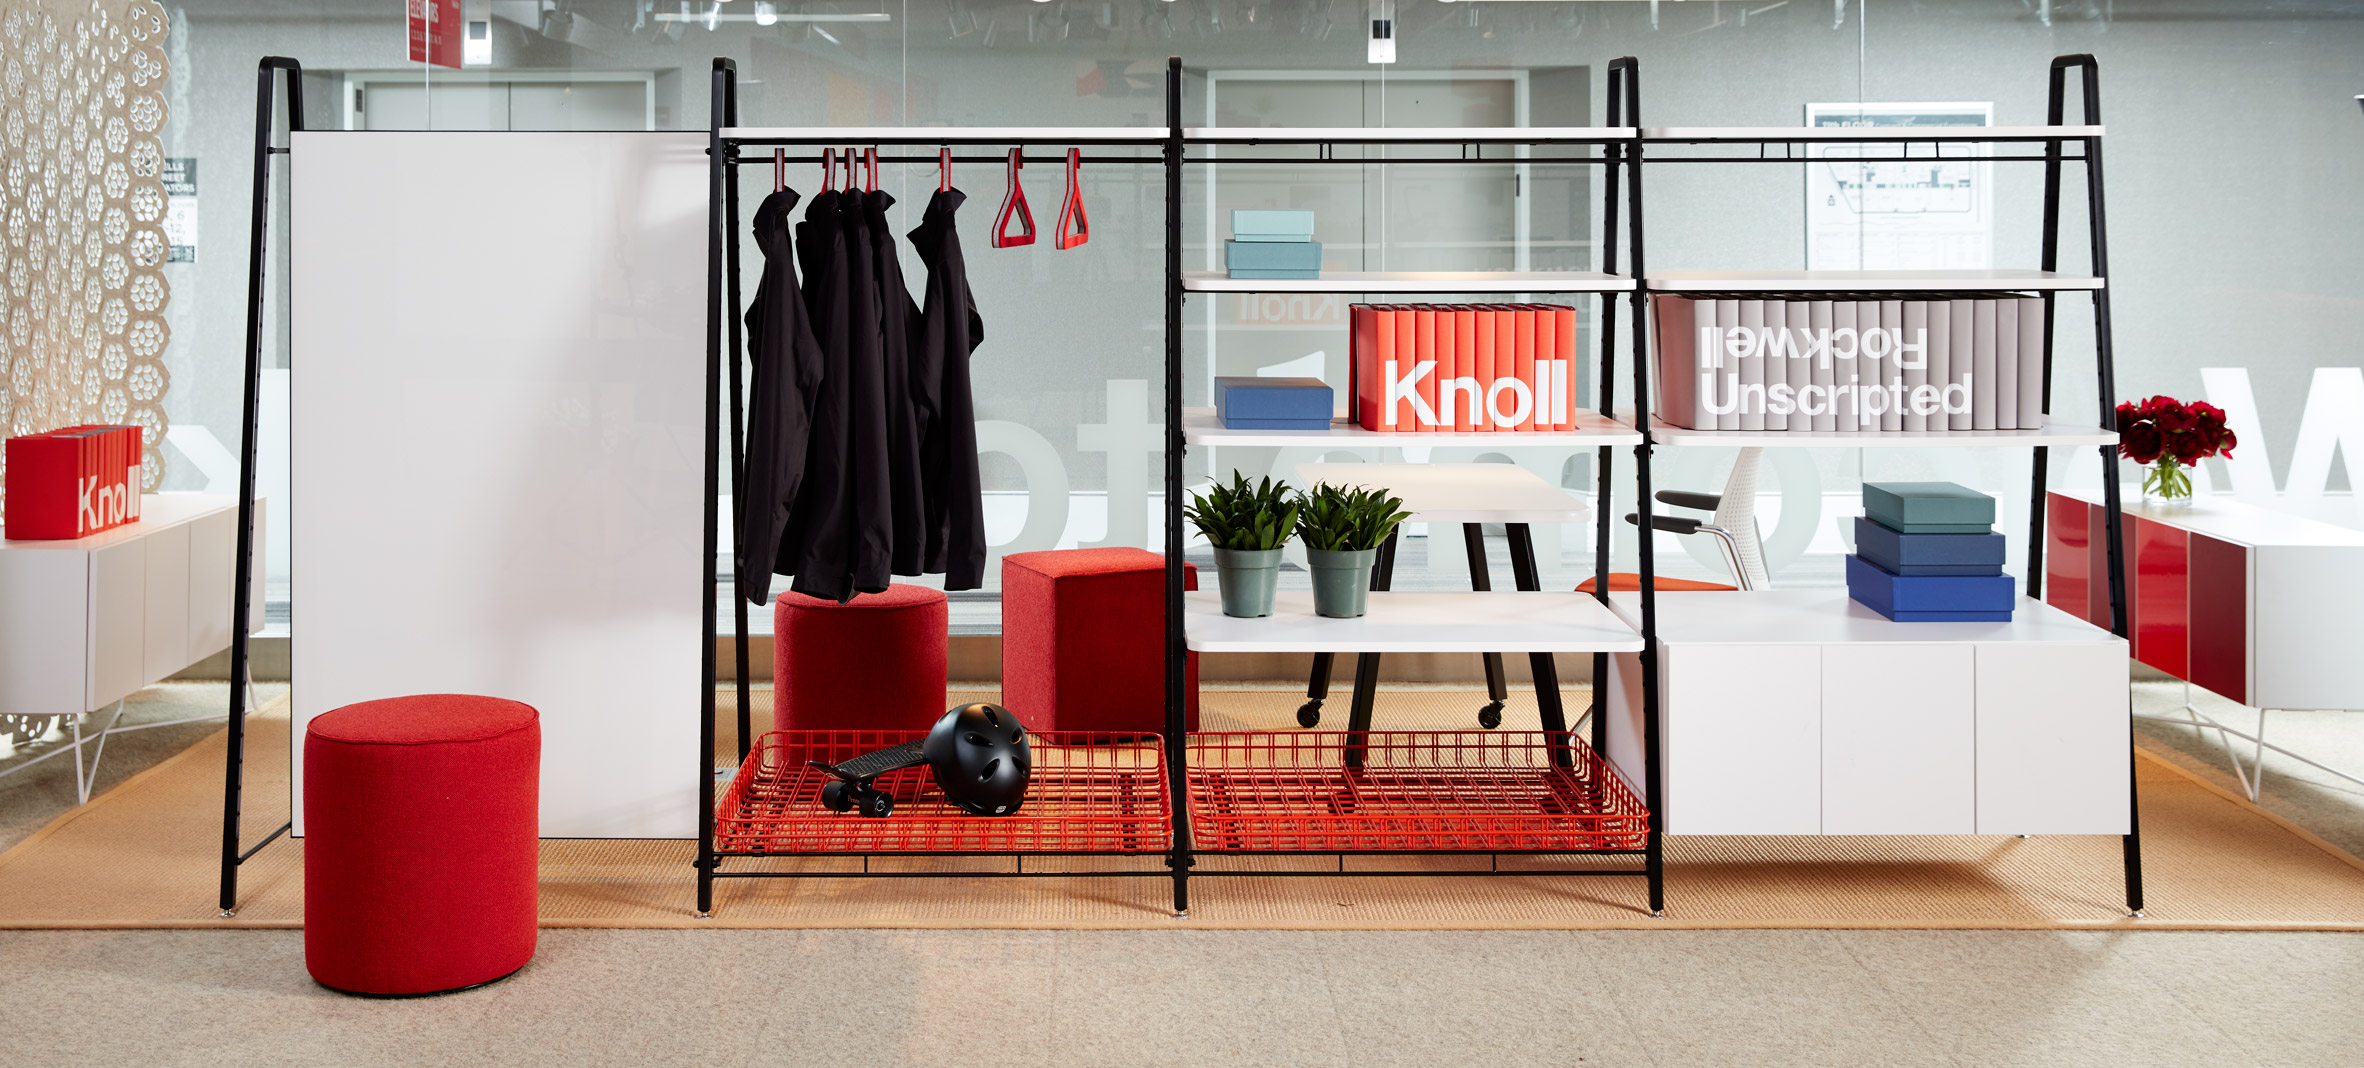 Rockwell Unscripted by Knoll